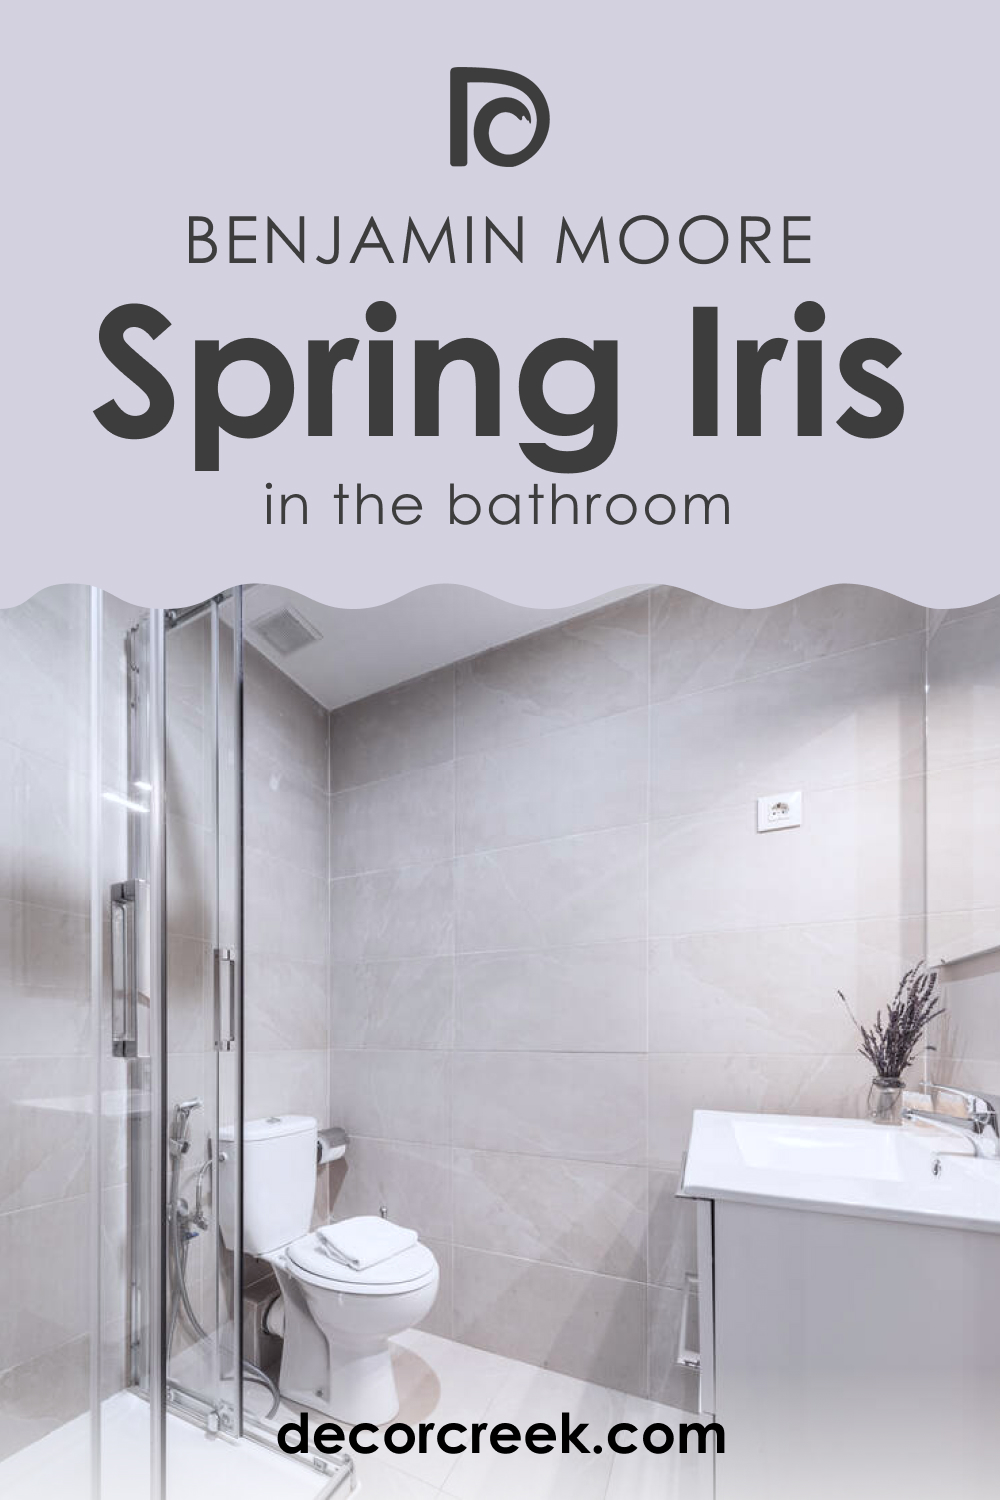 How to Use Spring Iris 1402 in the Bathroom?